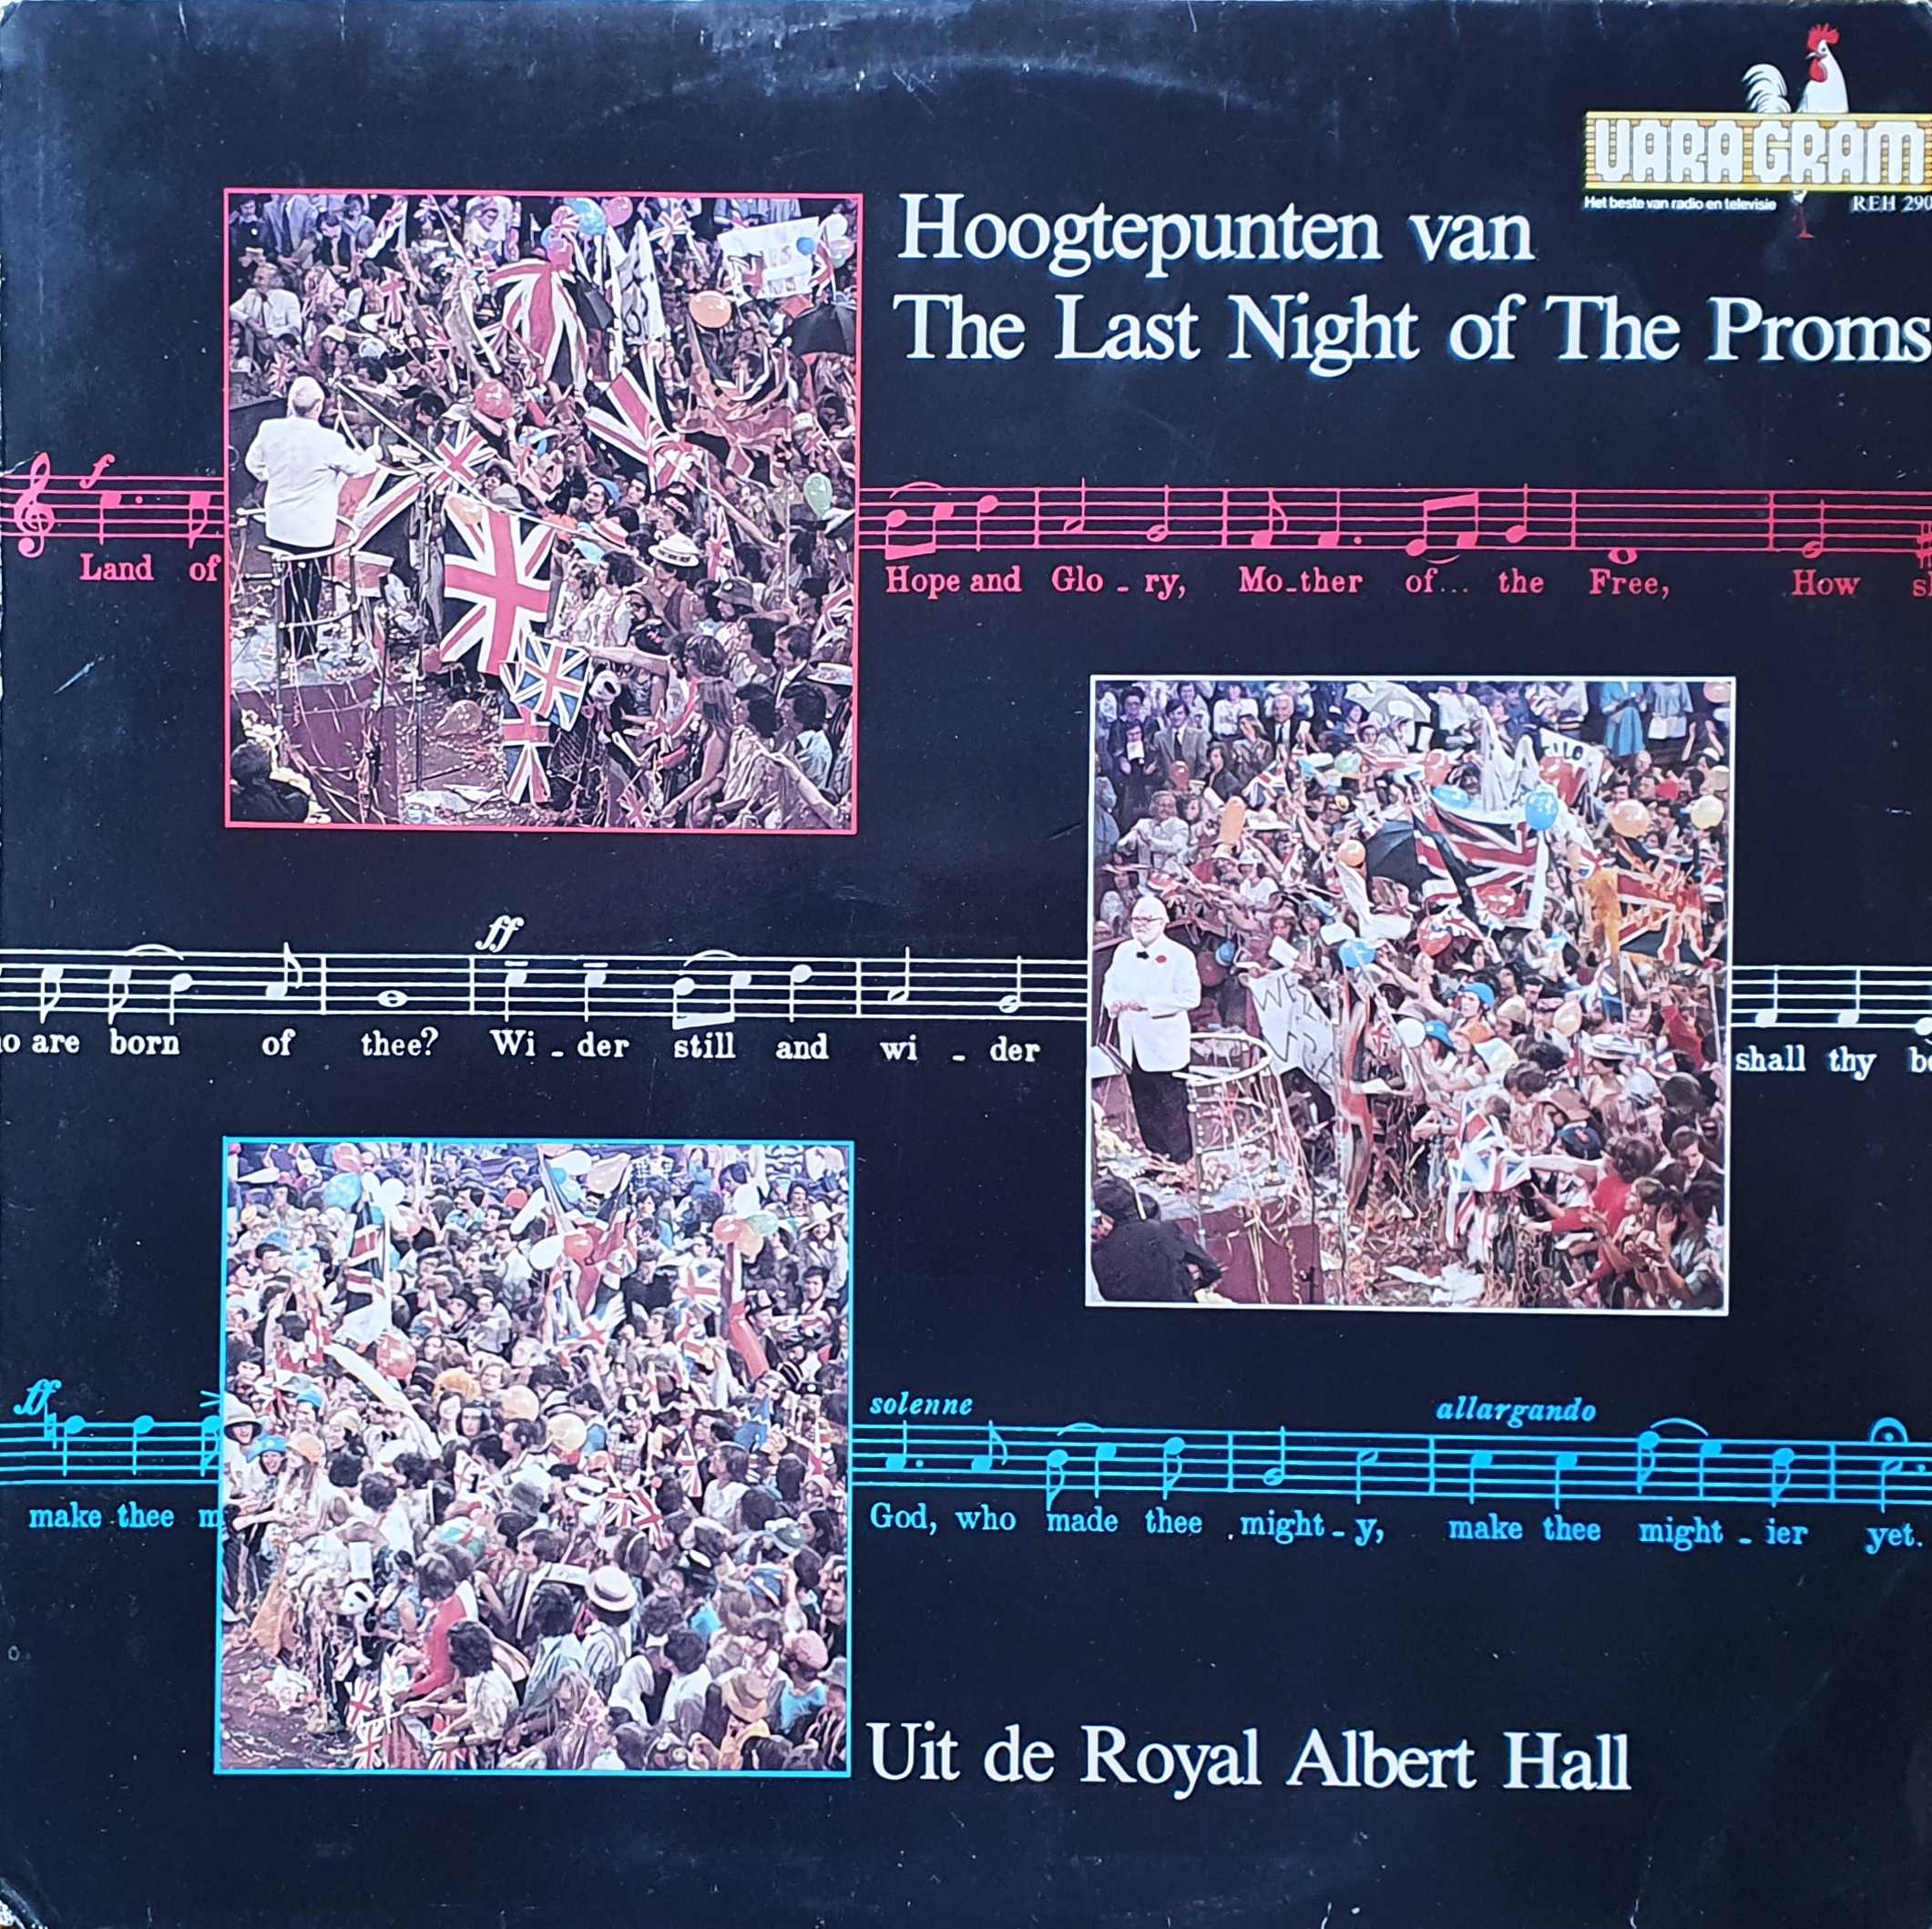 Picture of Hoogtepunten van the last night of The Proms by artist Various from the BBC albums - Records and Tapes library